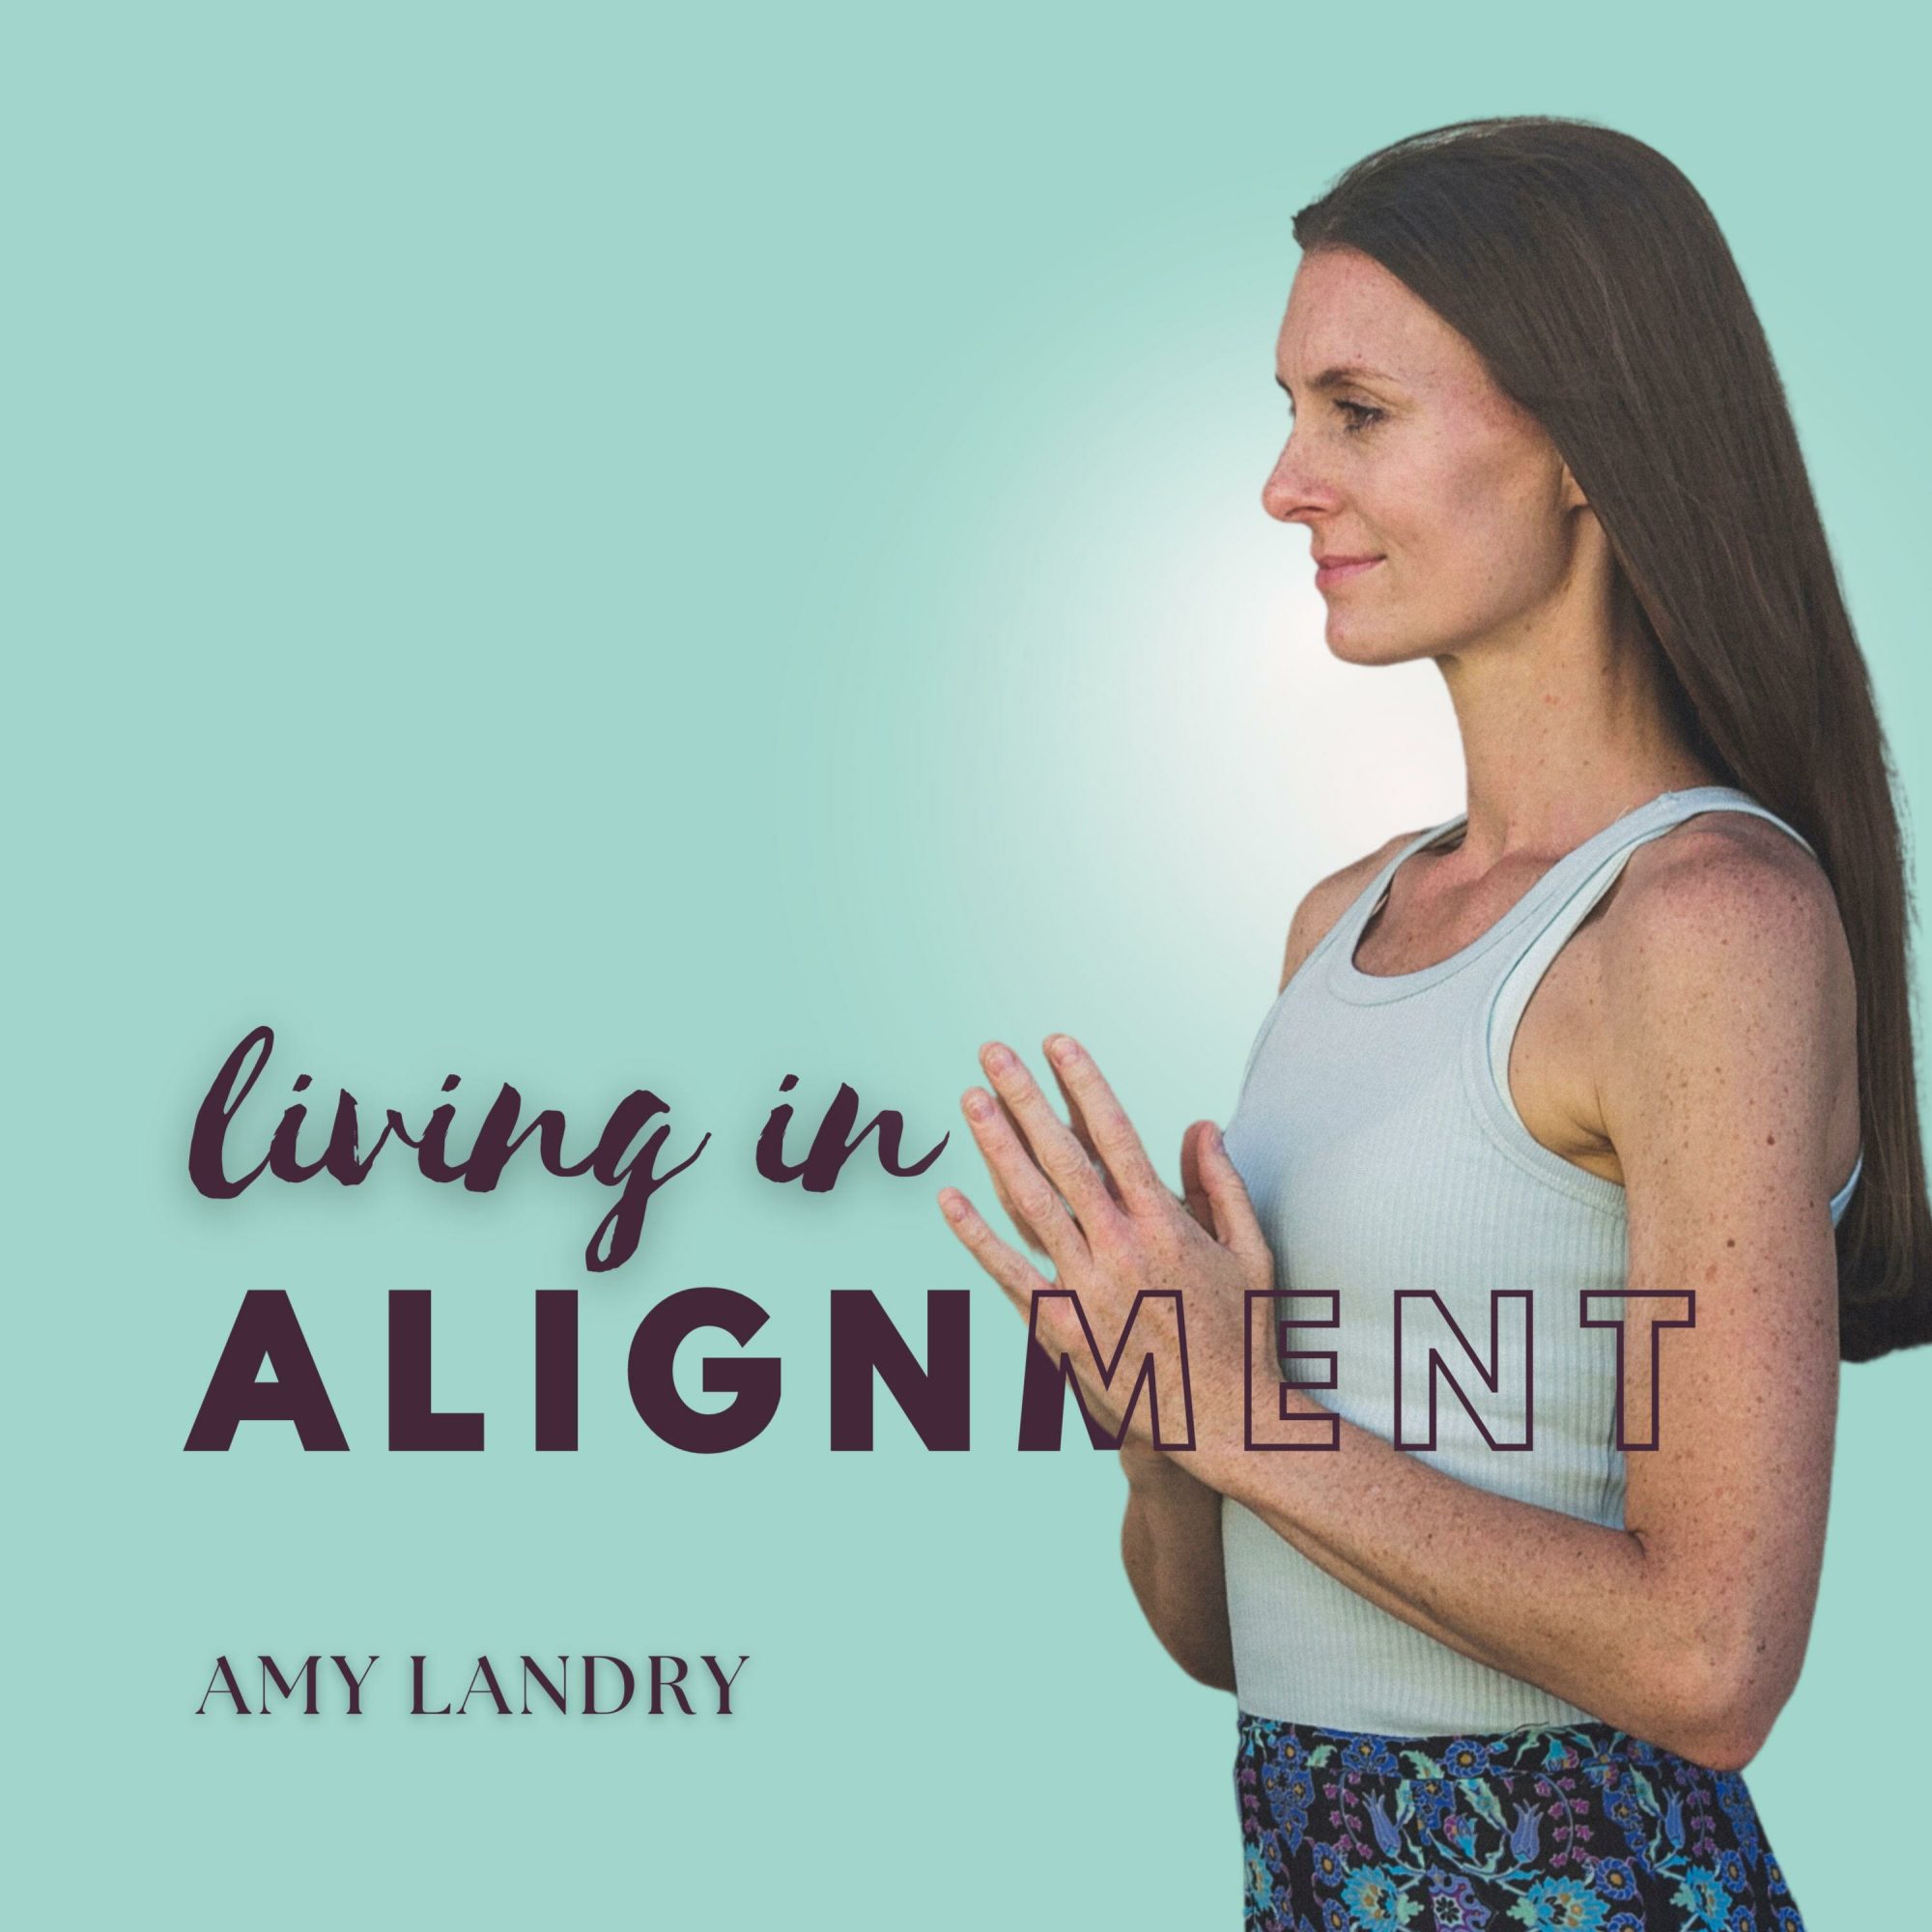 AMY LANDRY PODCAST LIVING IN ALIGNMENT